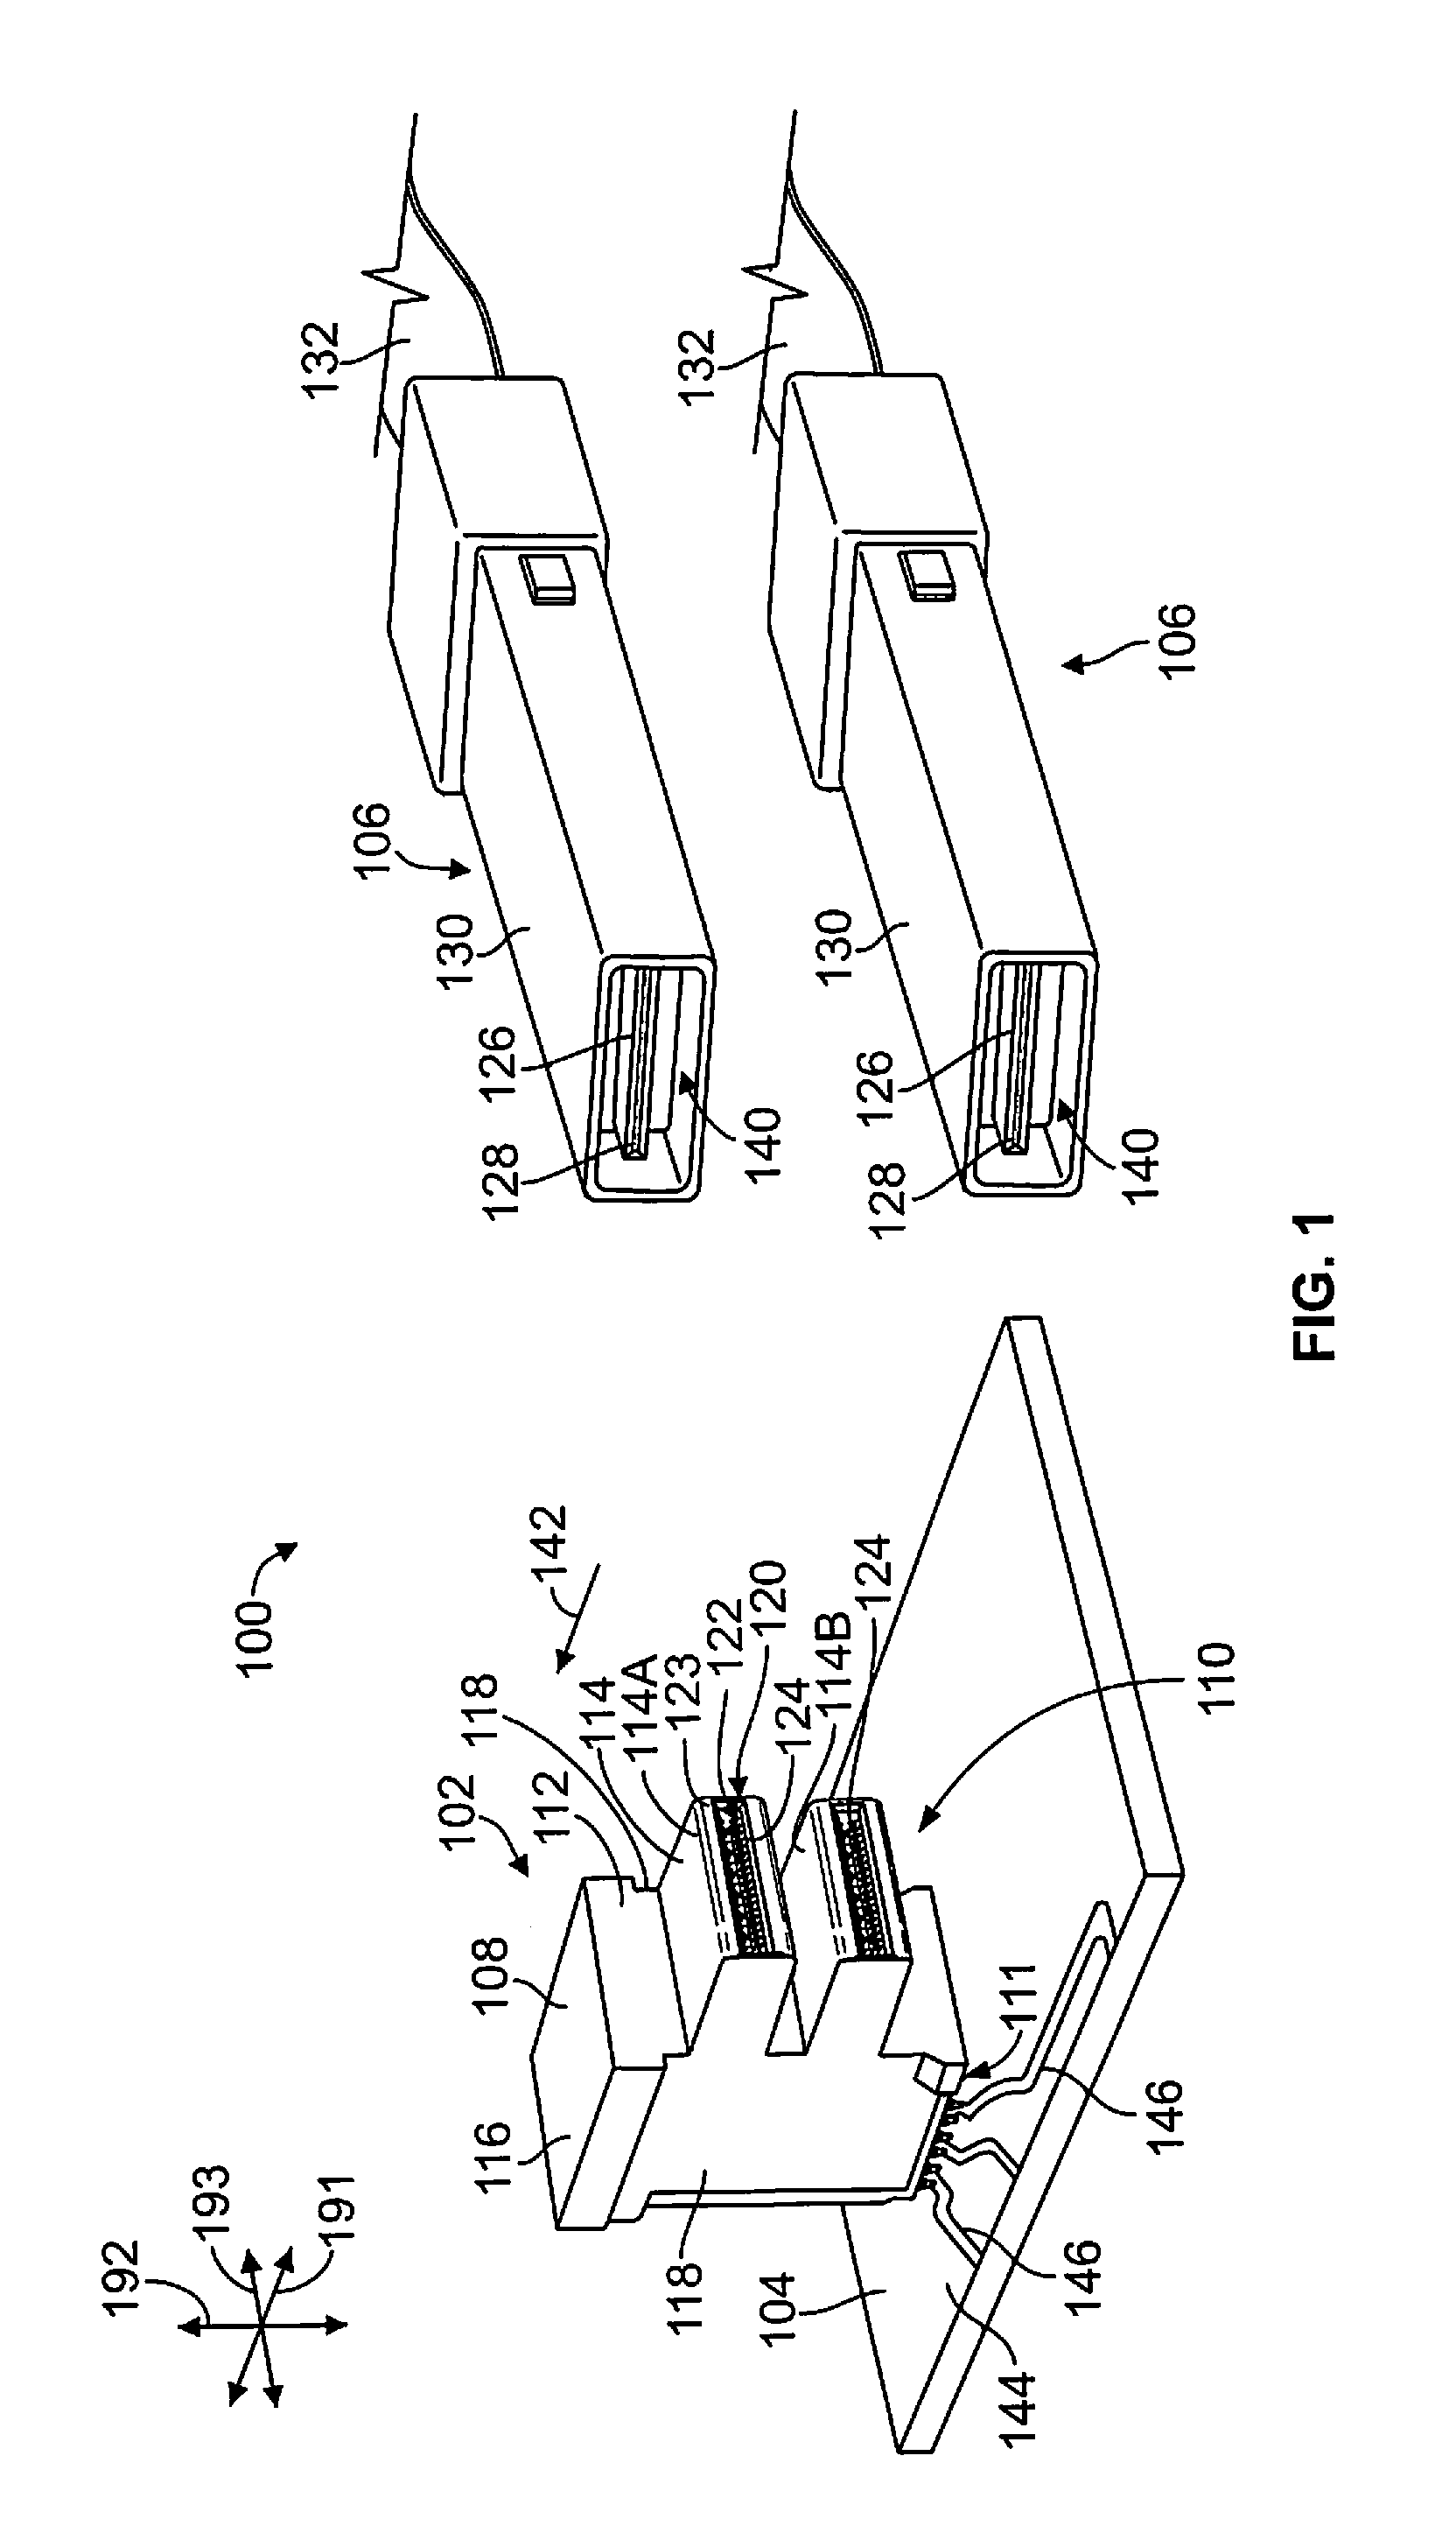 Electrical connector having contact modules